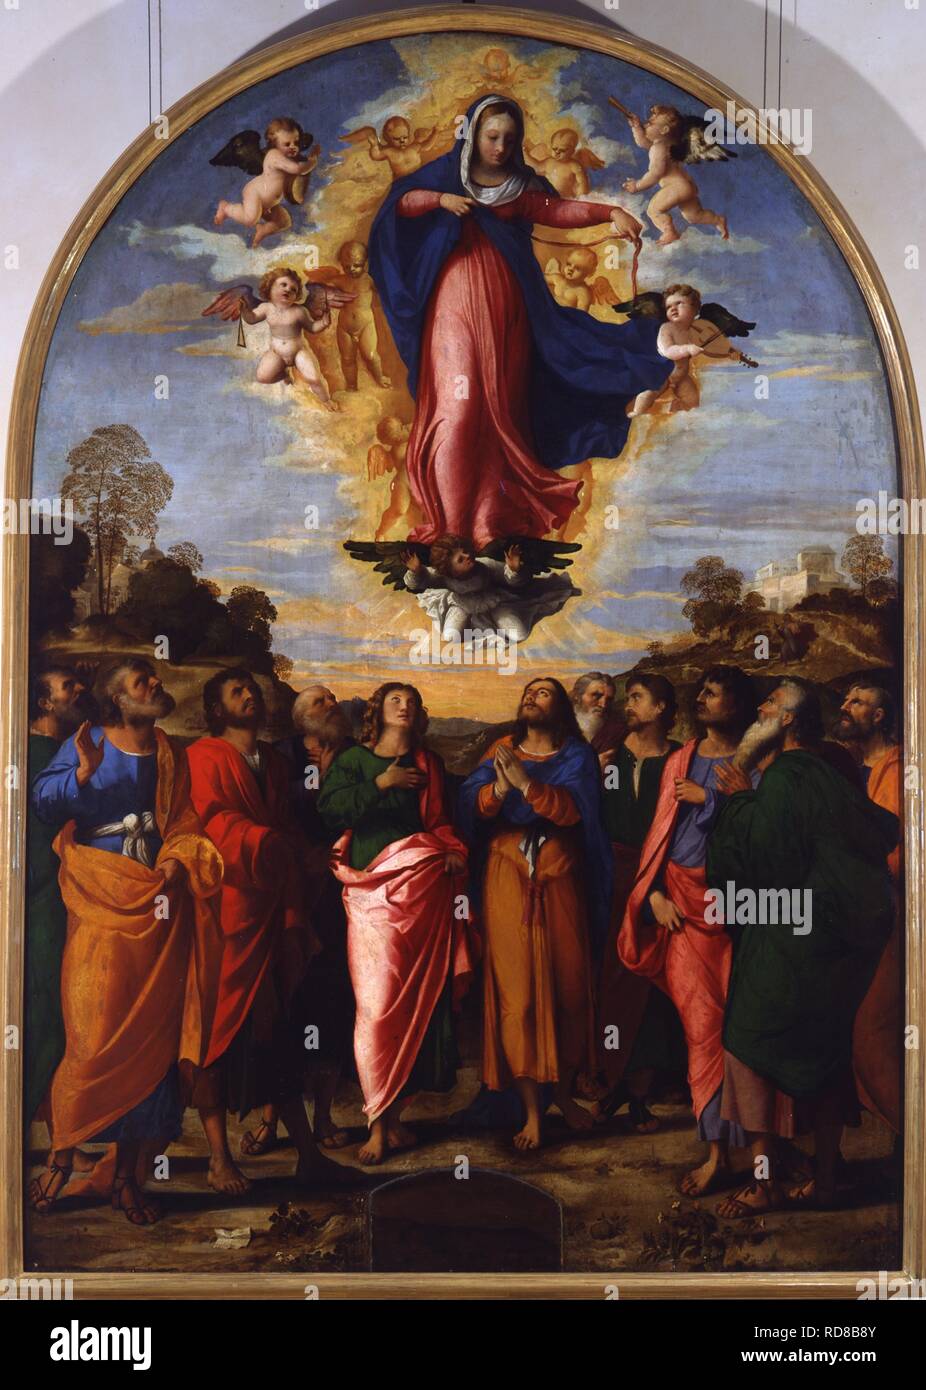 The Assumption of the Blessed Virgin Mary. Museum: Gallerie dell'Accademia, Venice. Author: Palma il Vecchio, Jacopo, the Elder. Stock Photo